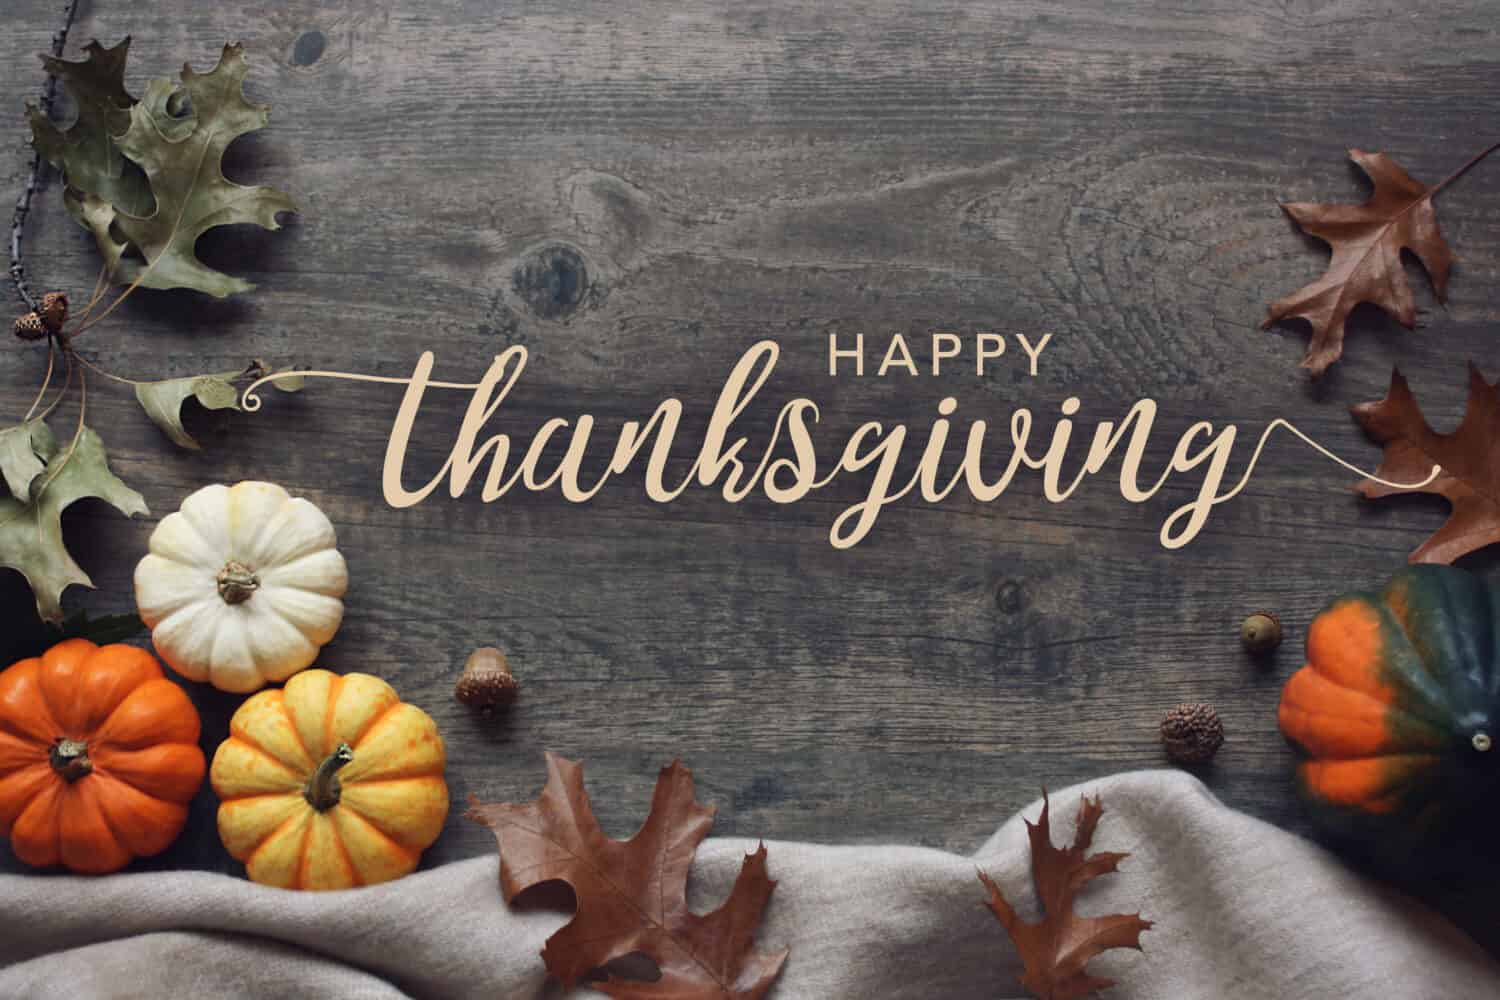 Happy Thanksgiving script with pumpkins and leaves over dark wooden background